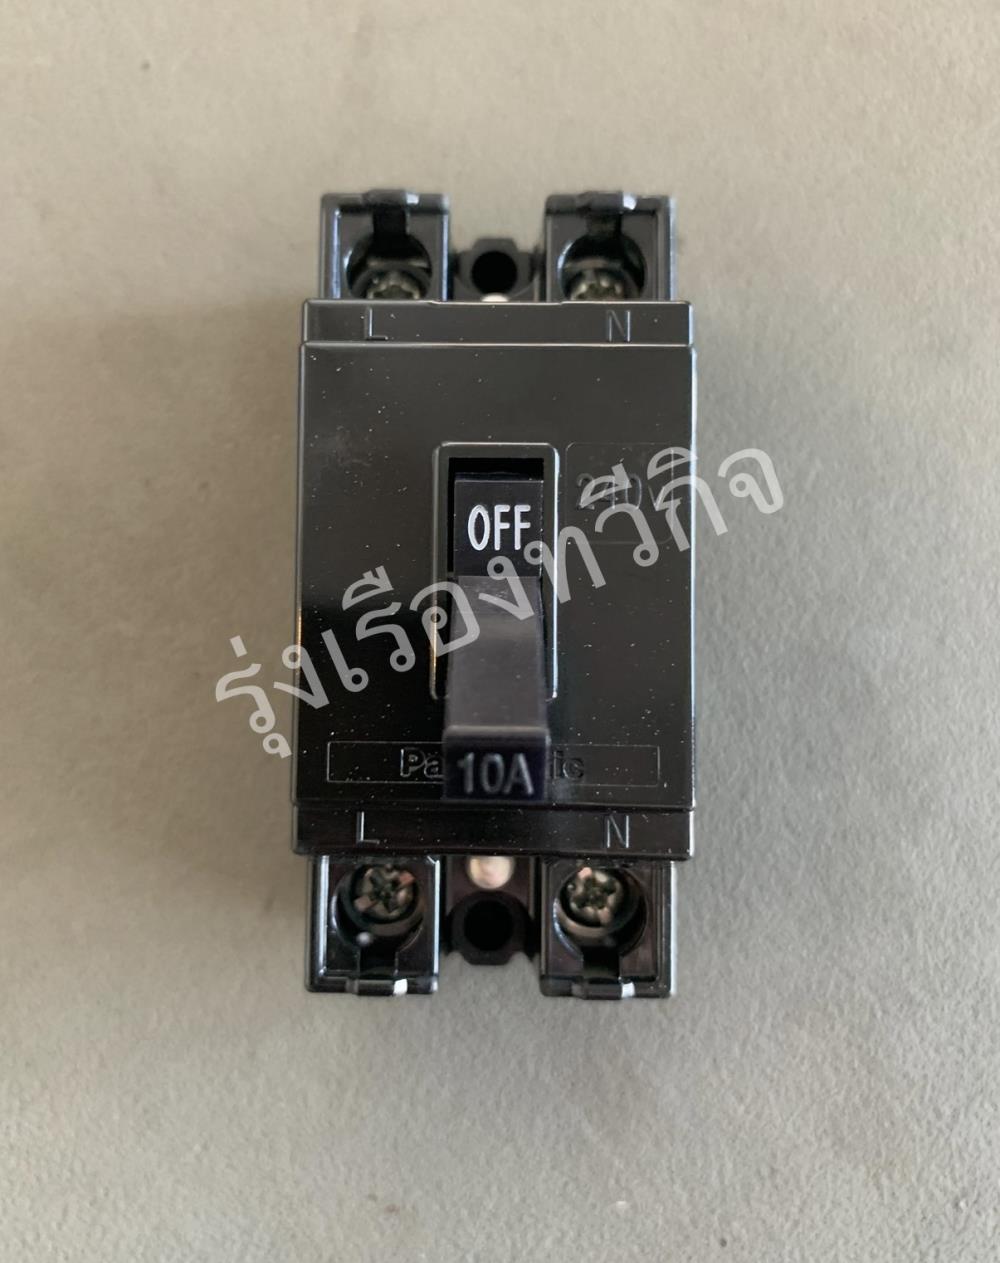 Safety Breaker #BS1110YT HB 2P 10A PANASONIC,Safety Breaker #BS1110YT HB 2P 10A PANASONIC, PANASONIC,Plant and Facility Equipment/HVAC/Equipment & Supplies